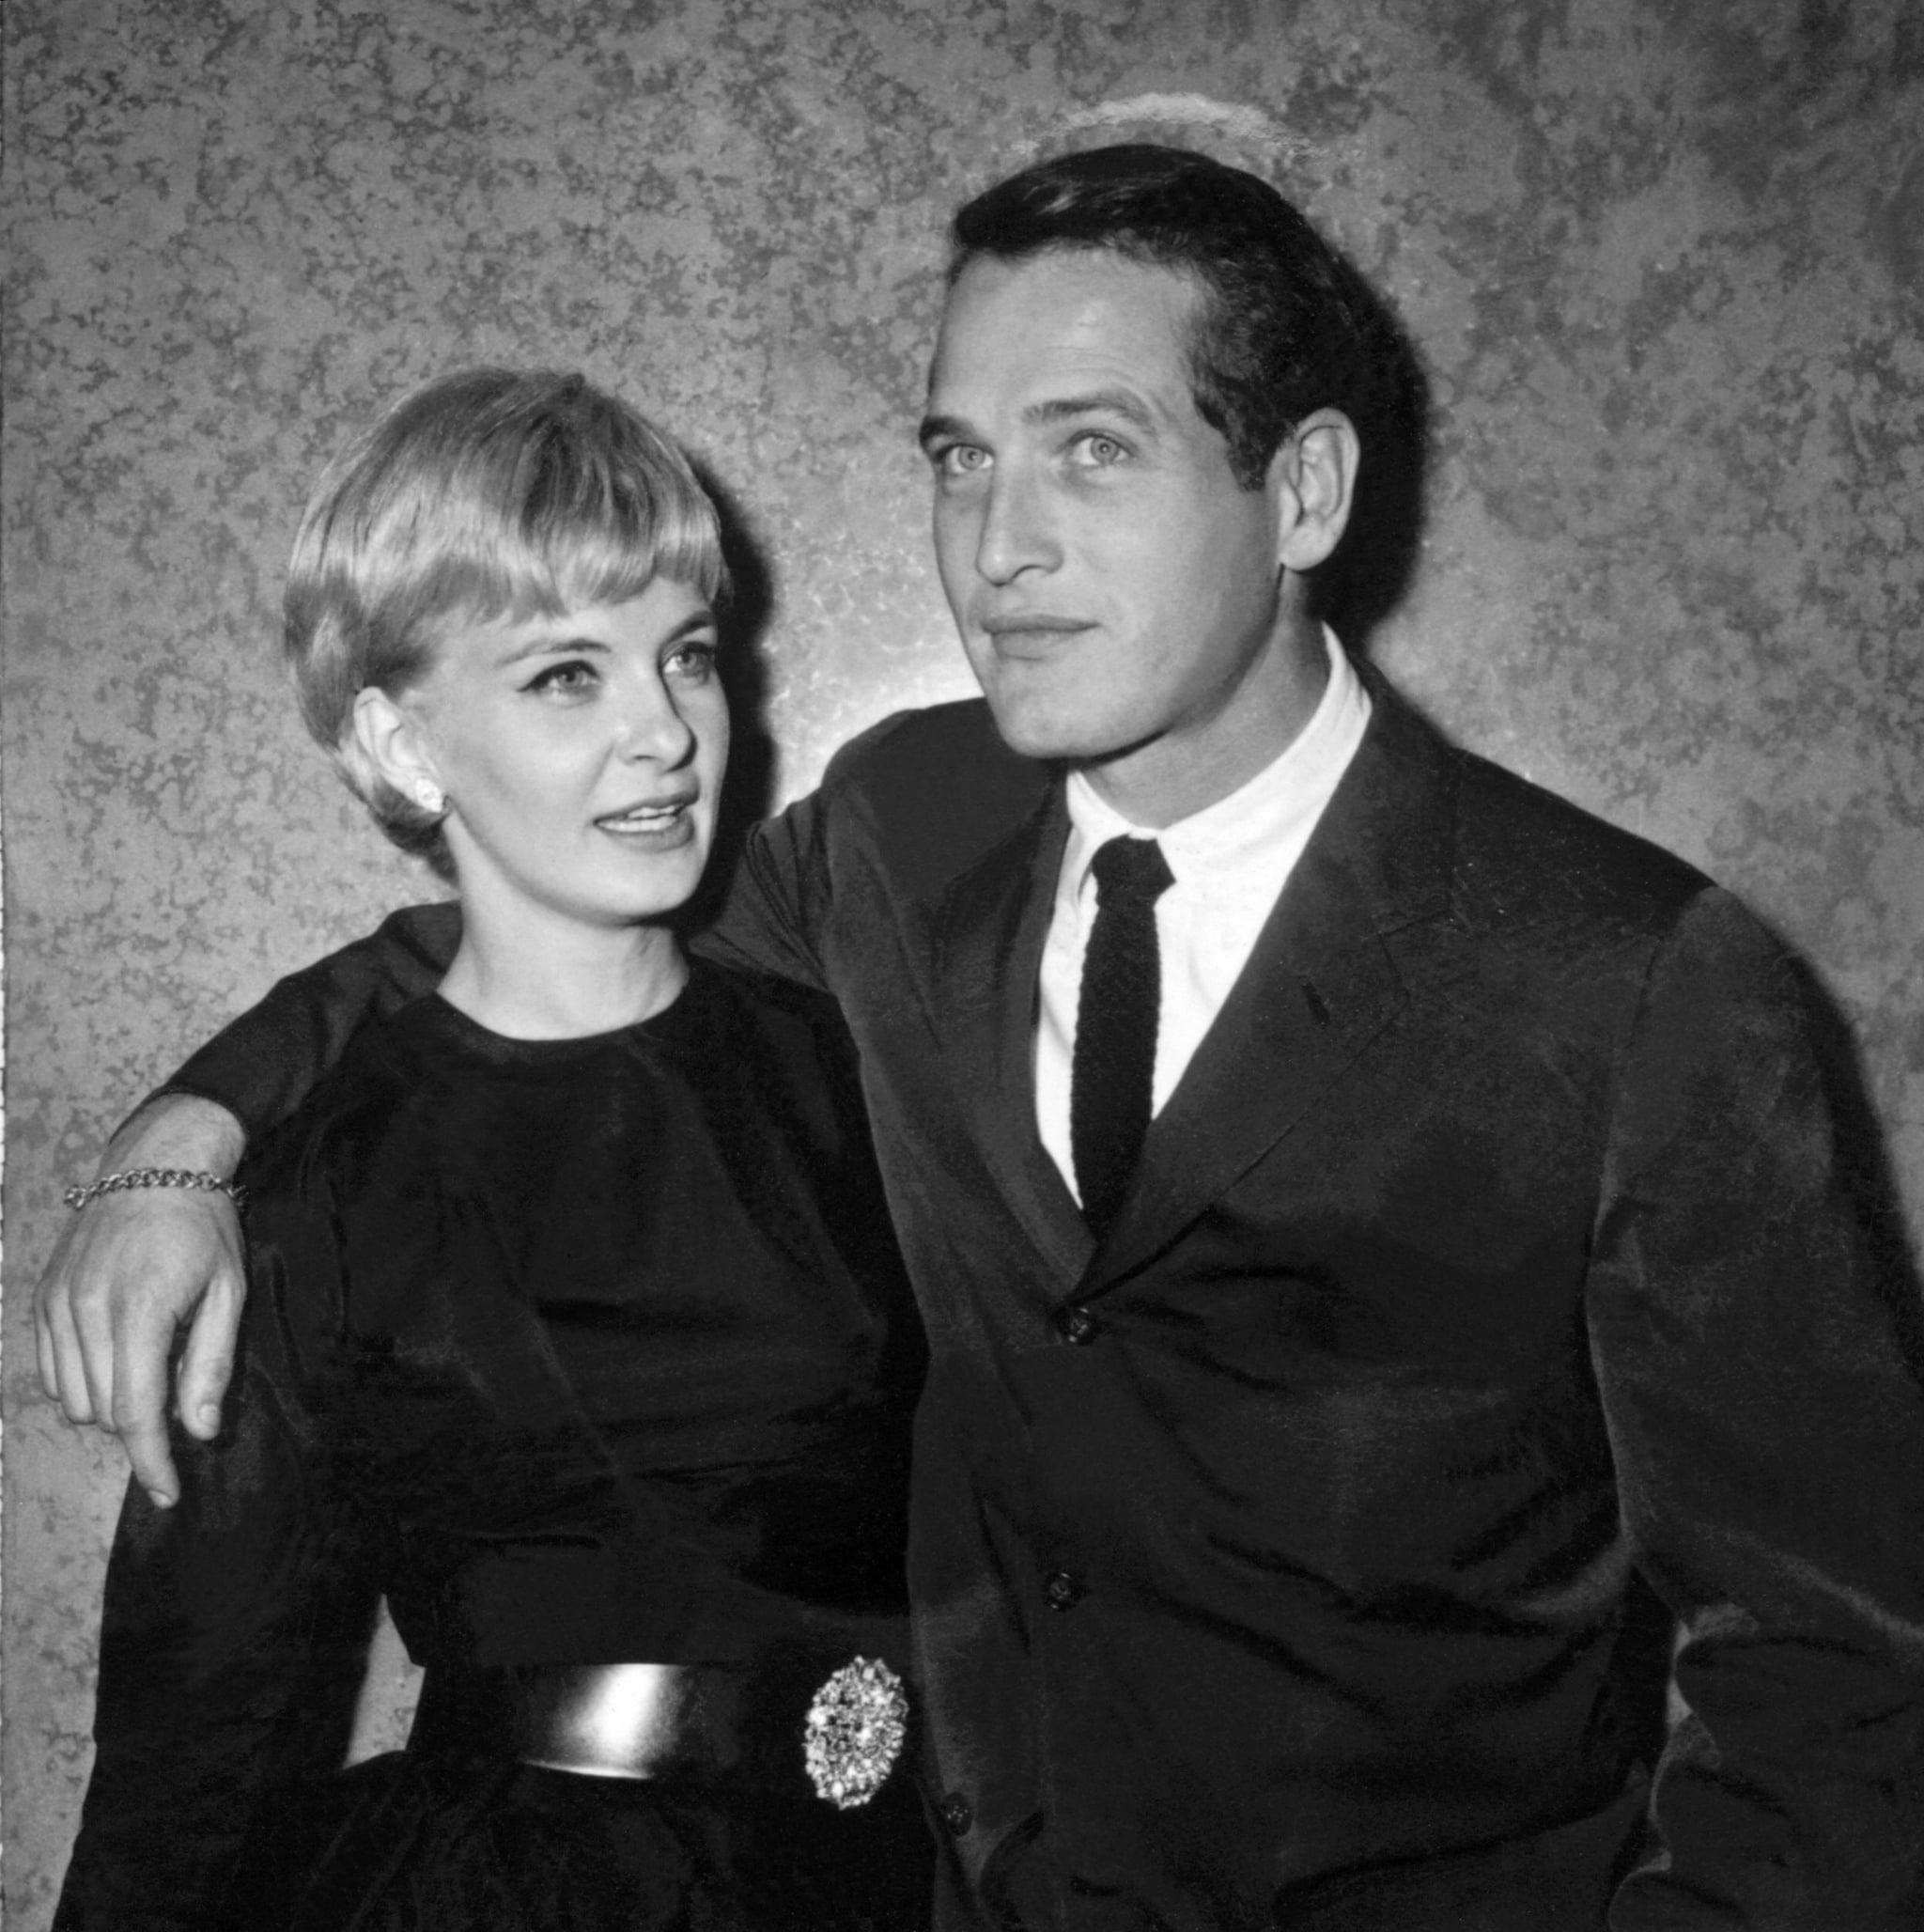 8X10 PUBLICITY PHOTO ZZ-956 PAUL NEWMAN AND JOANNE WOODWARD 